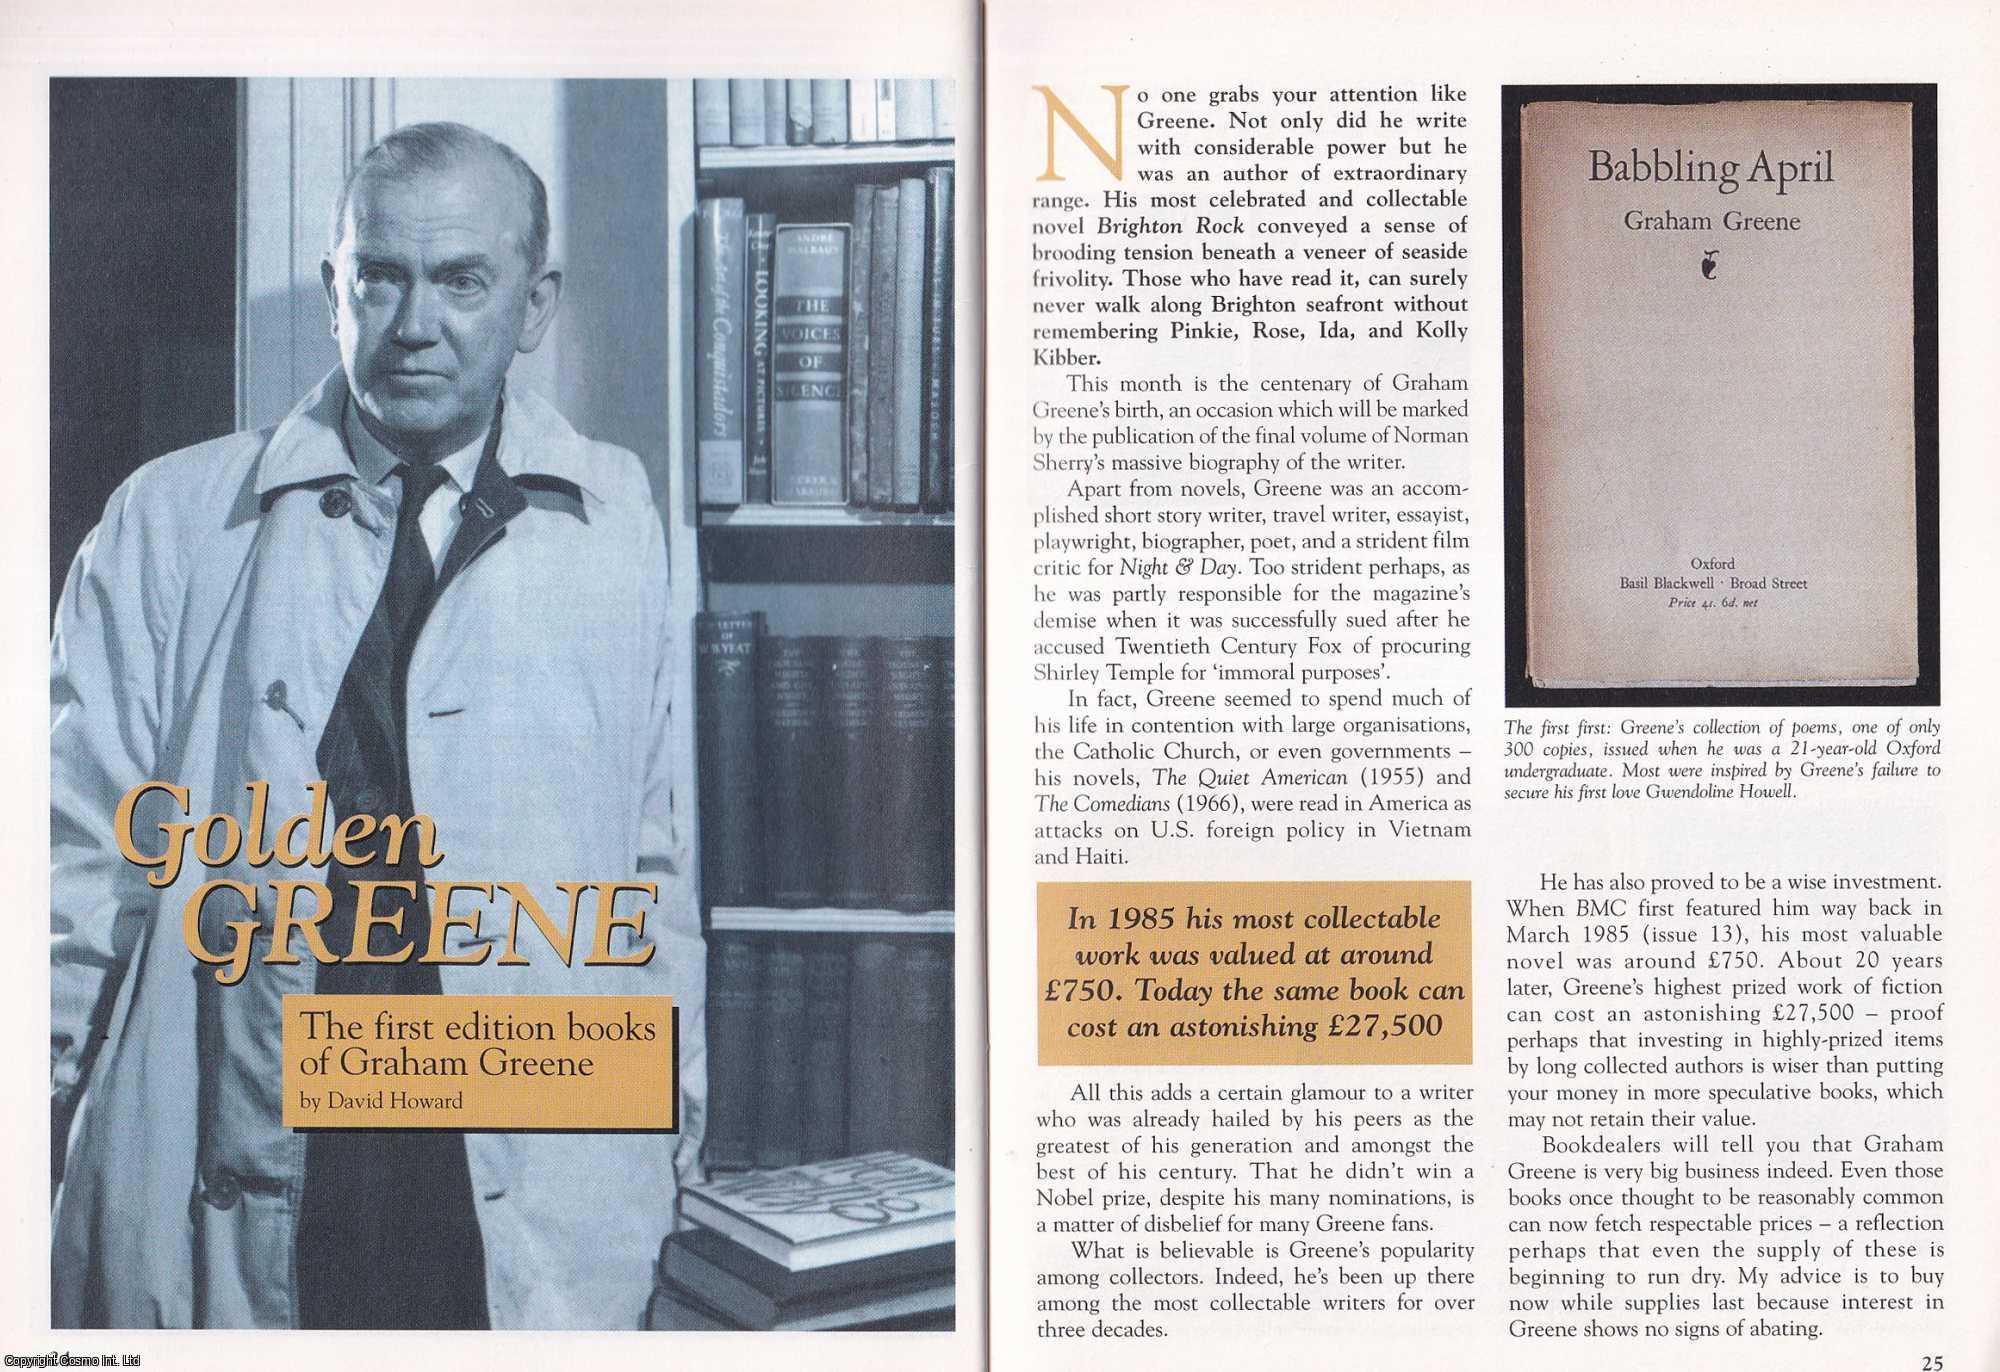 David Howard - Graham Greene : First Editions. This is an original article separated from an issue of The Book & Magazine Collector publication, 2004.